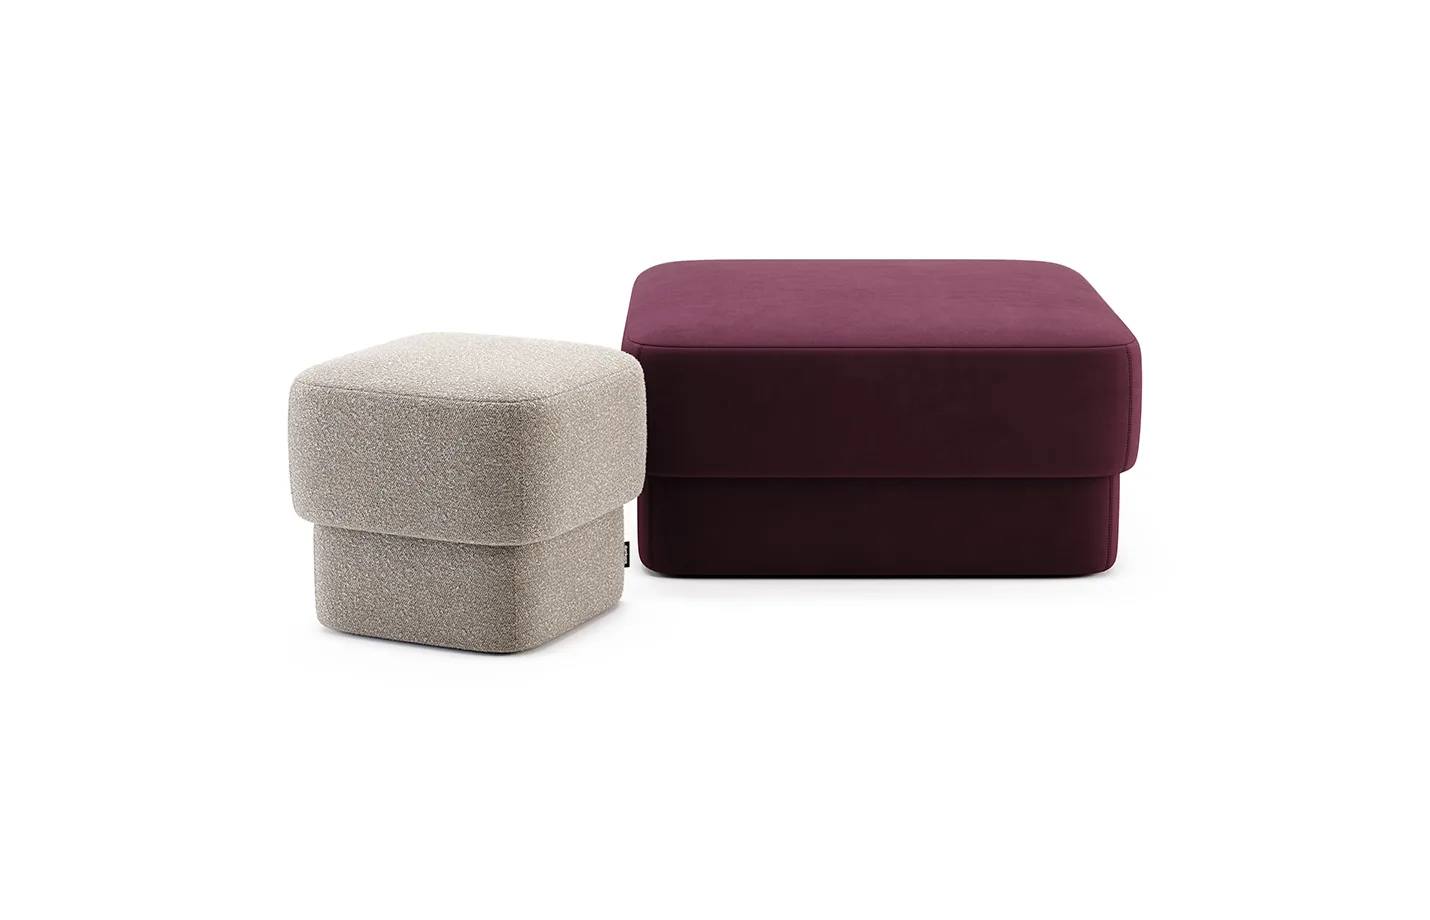 Kate large pouf Aldan 2932 fabric with kate small pouf Columbia Toffee